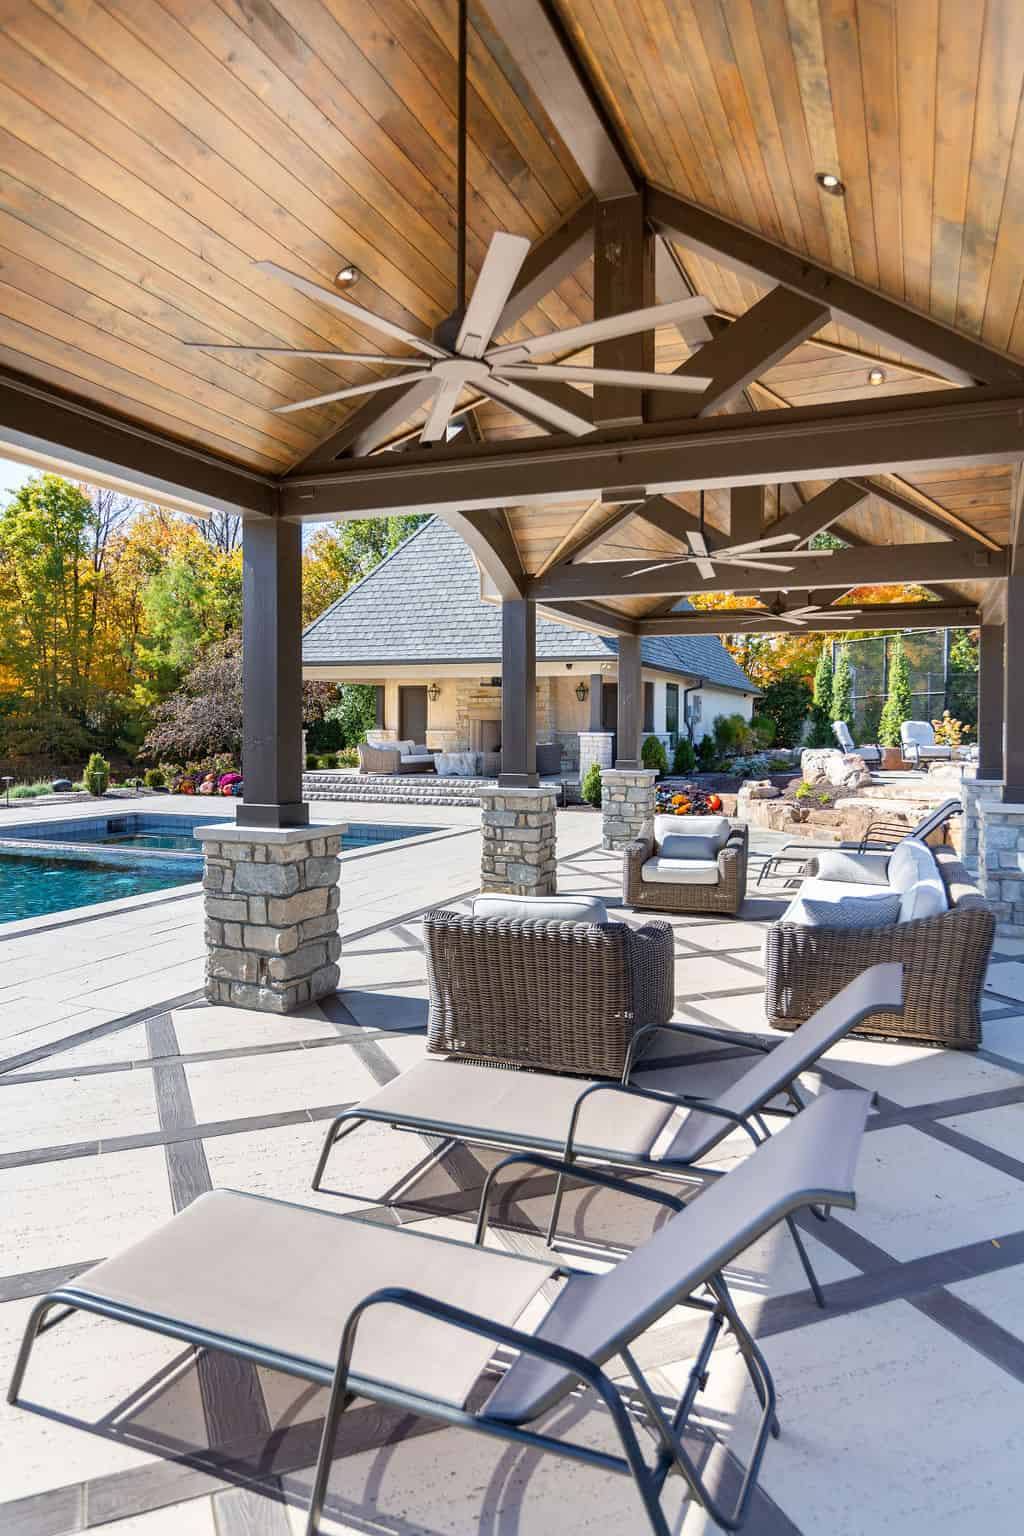 Nicholas Design Build | An outdoor patio with lounge chairs and a pool.